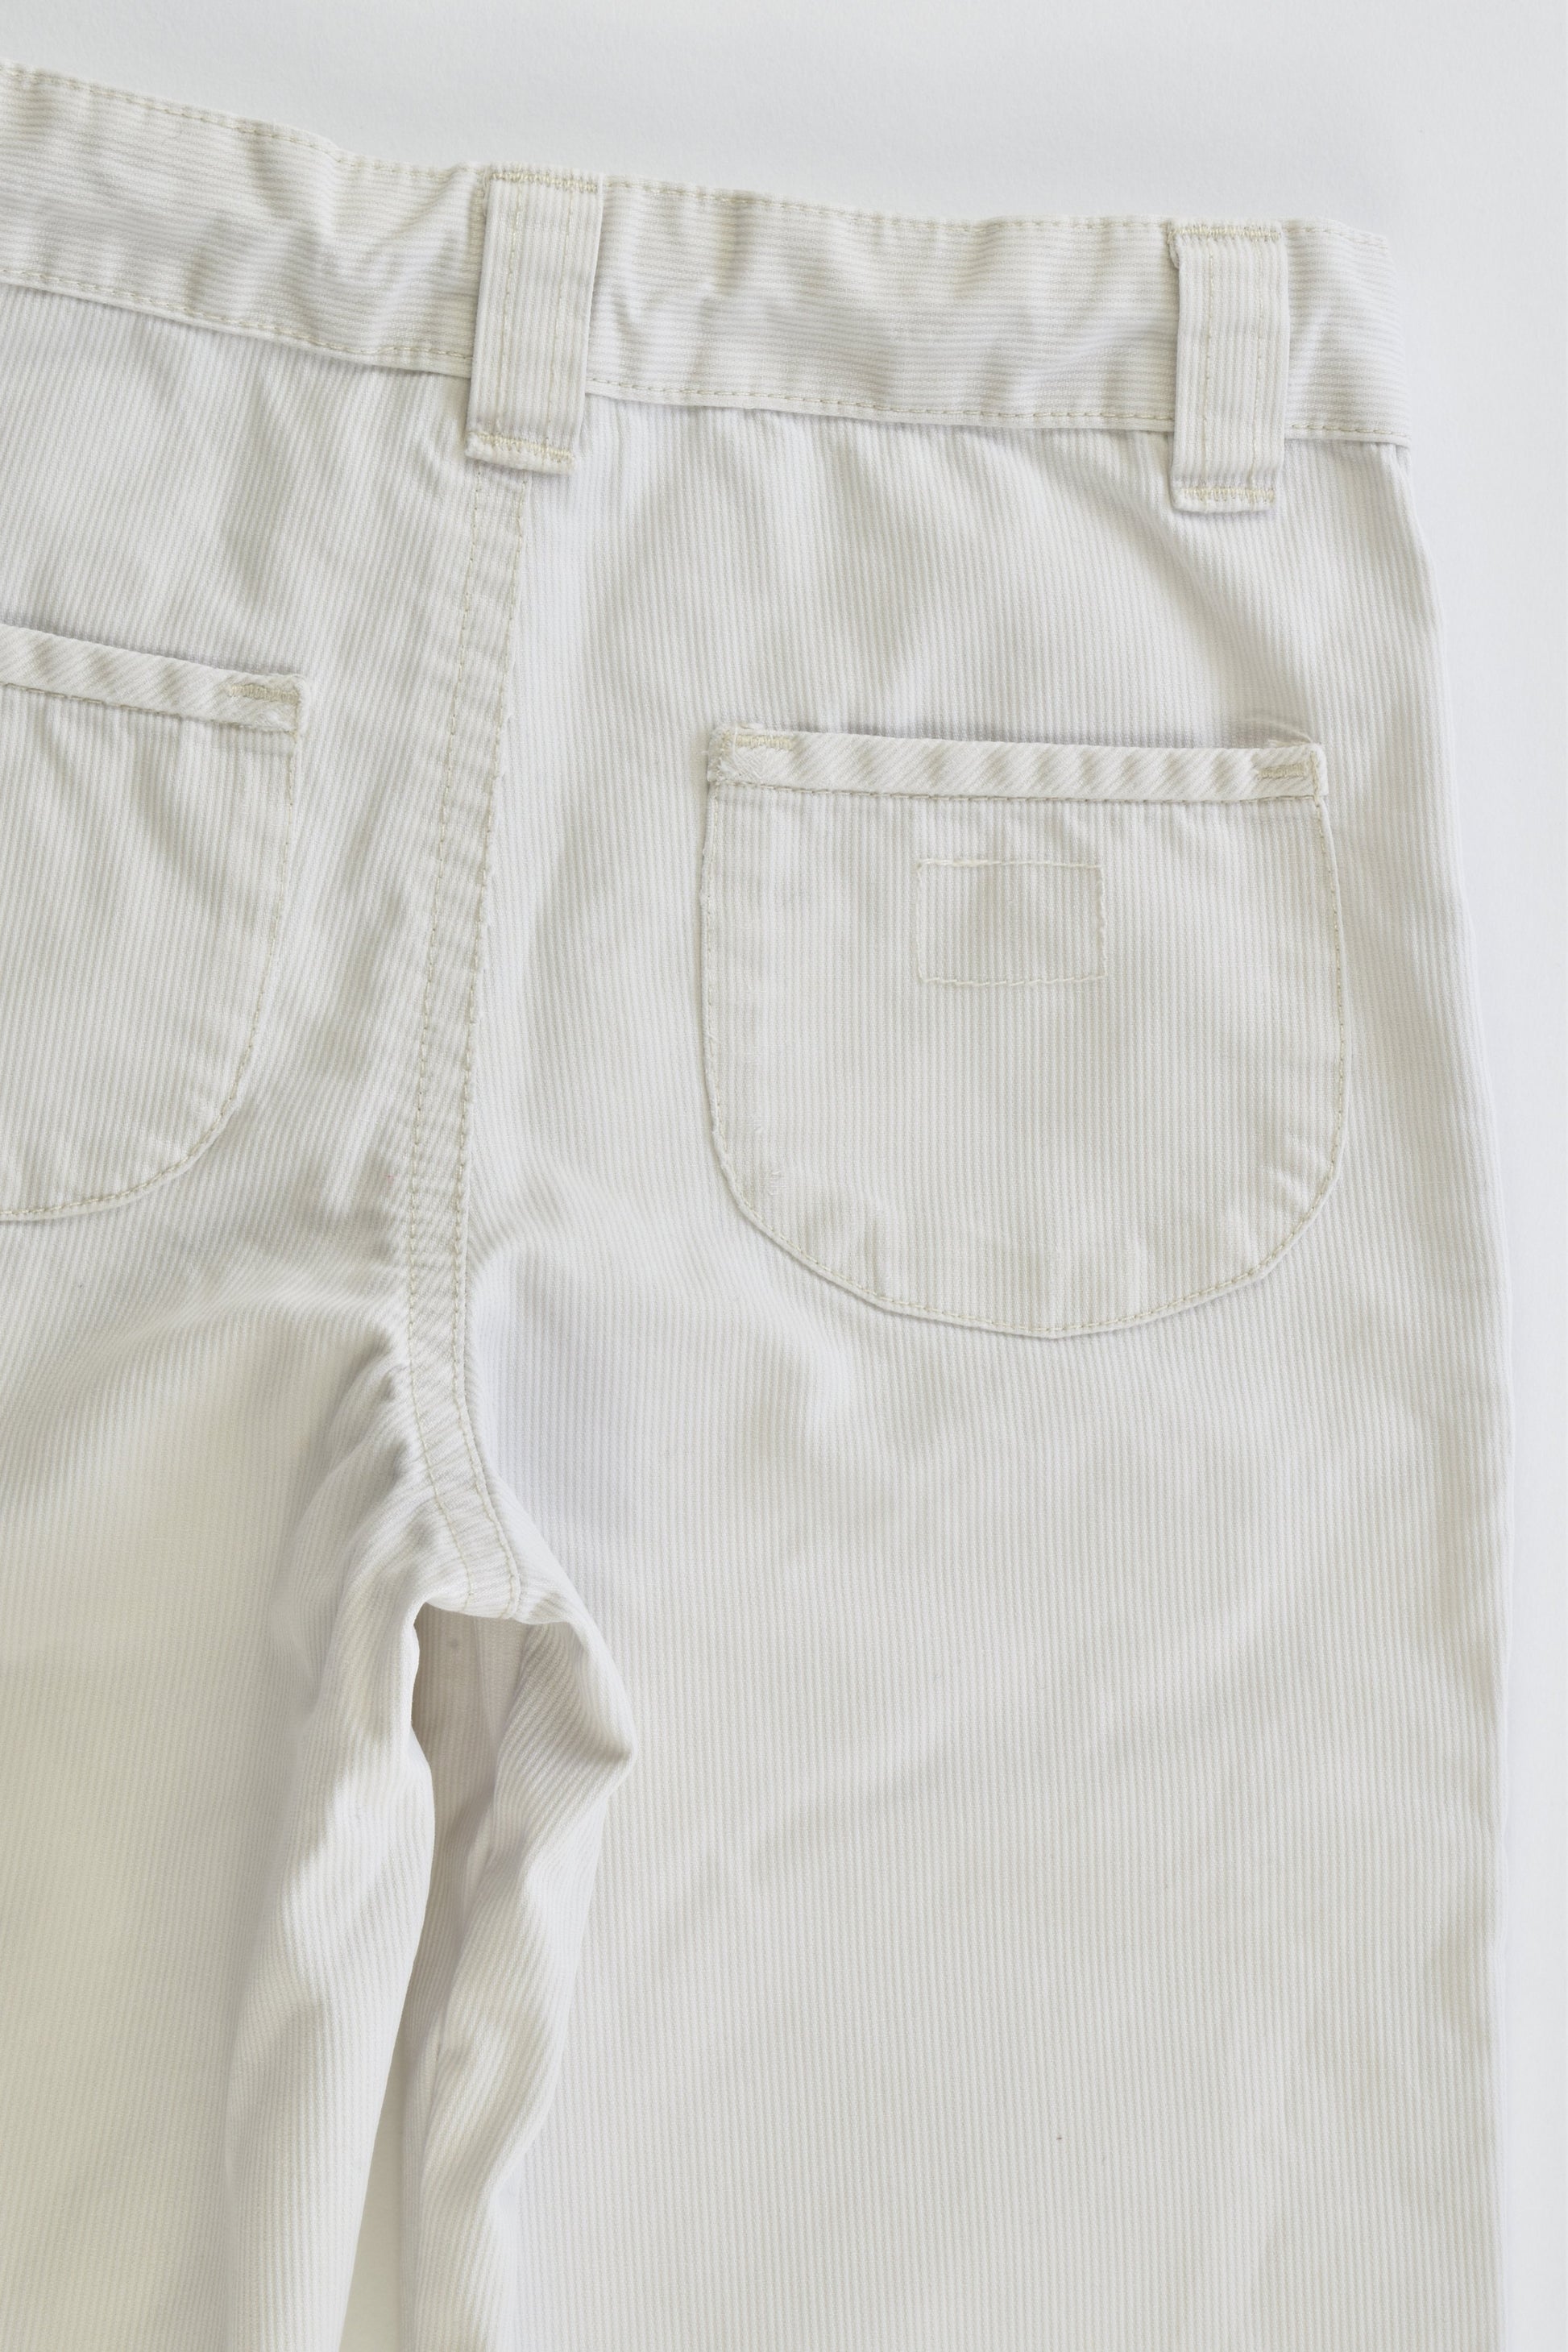 Country Road Size 12-18 months (1) Pants